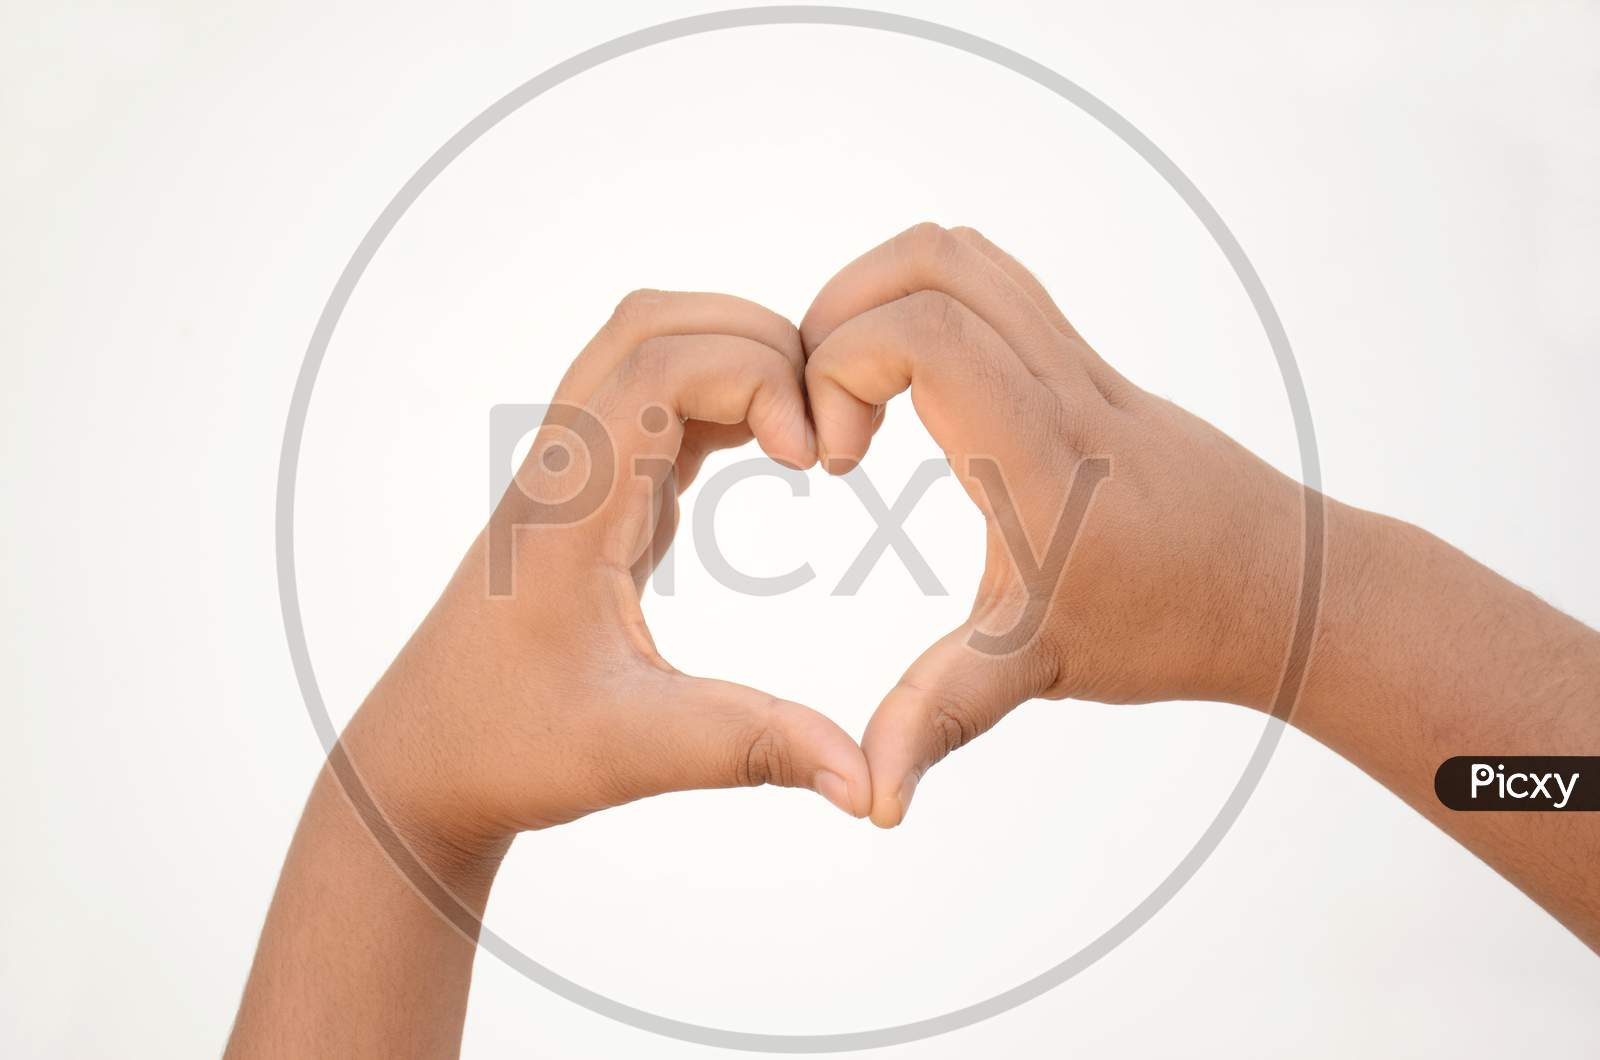 Heart Shape Hands Mental Health Awareness Concept Isolated On White Background.